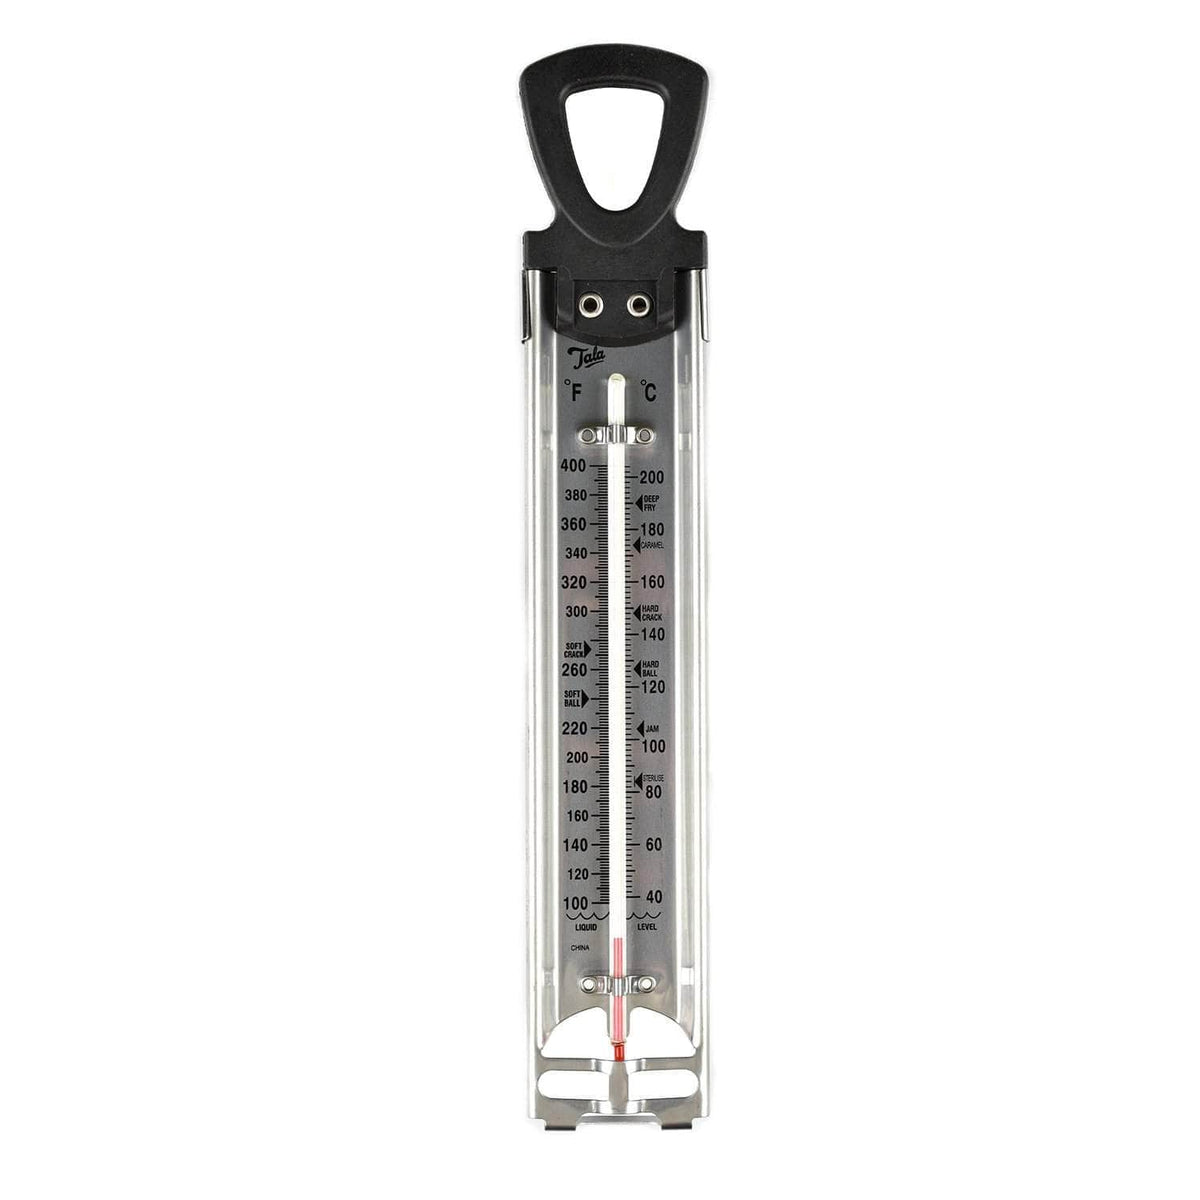 Jam/confectionary thermometer